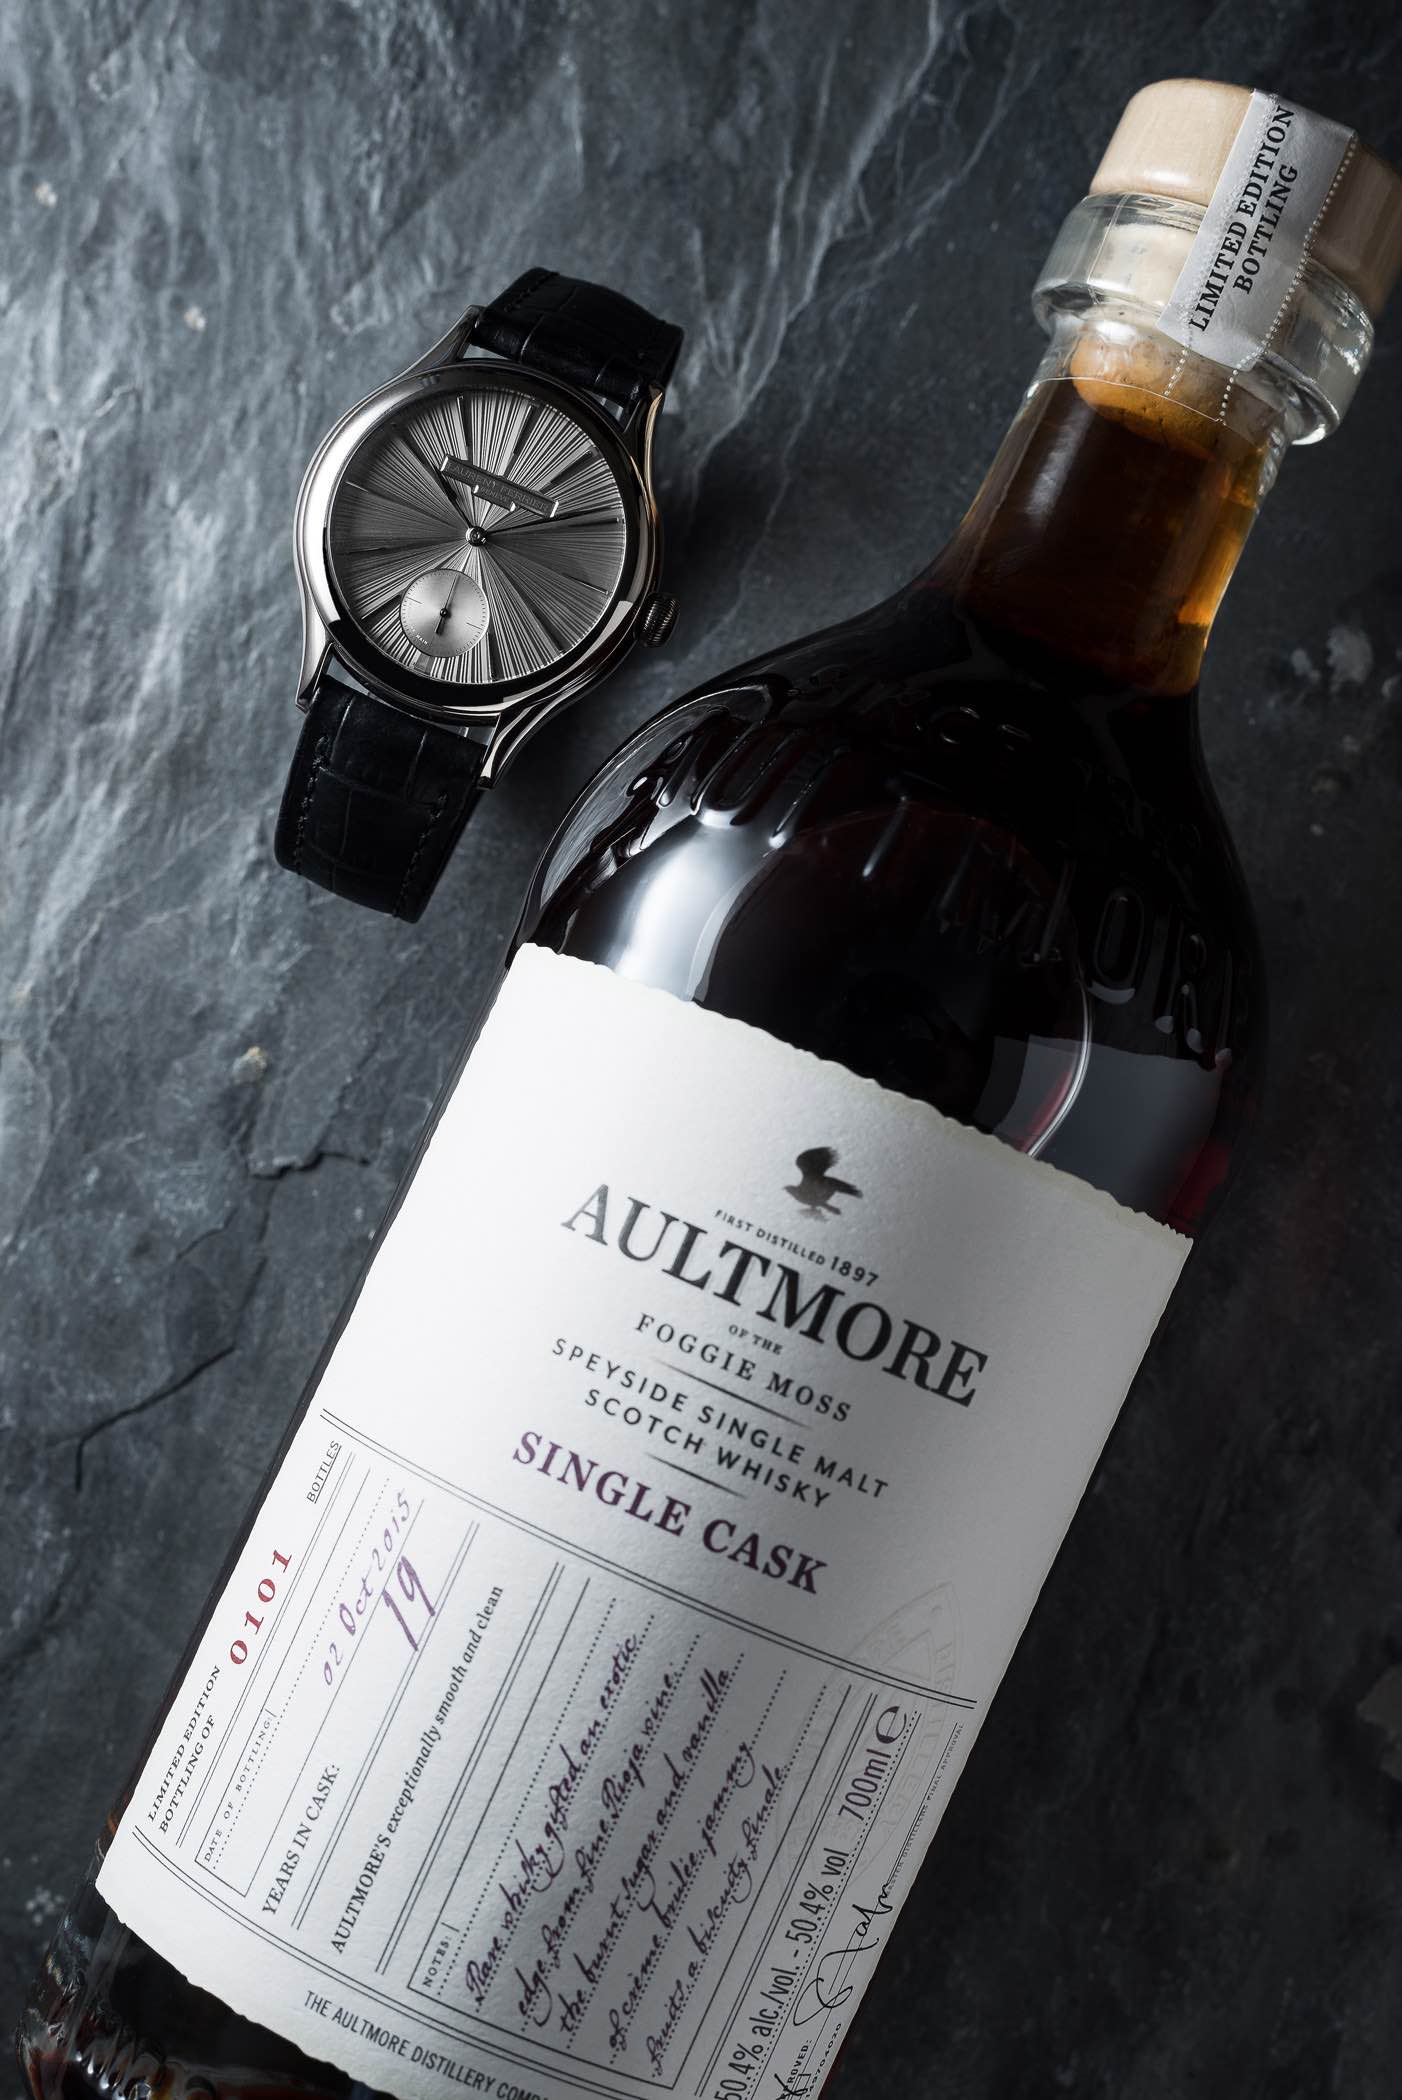 Watches & Whiskey: Aultmore + Laurent Ferrier